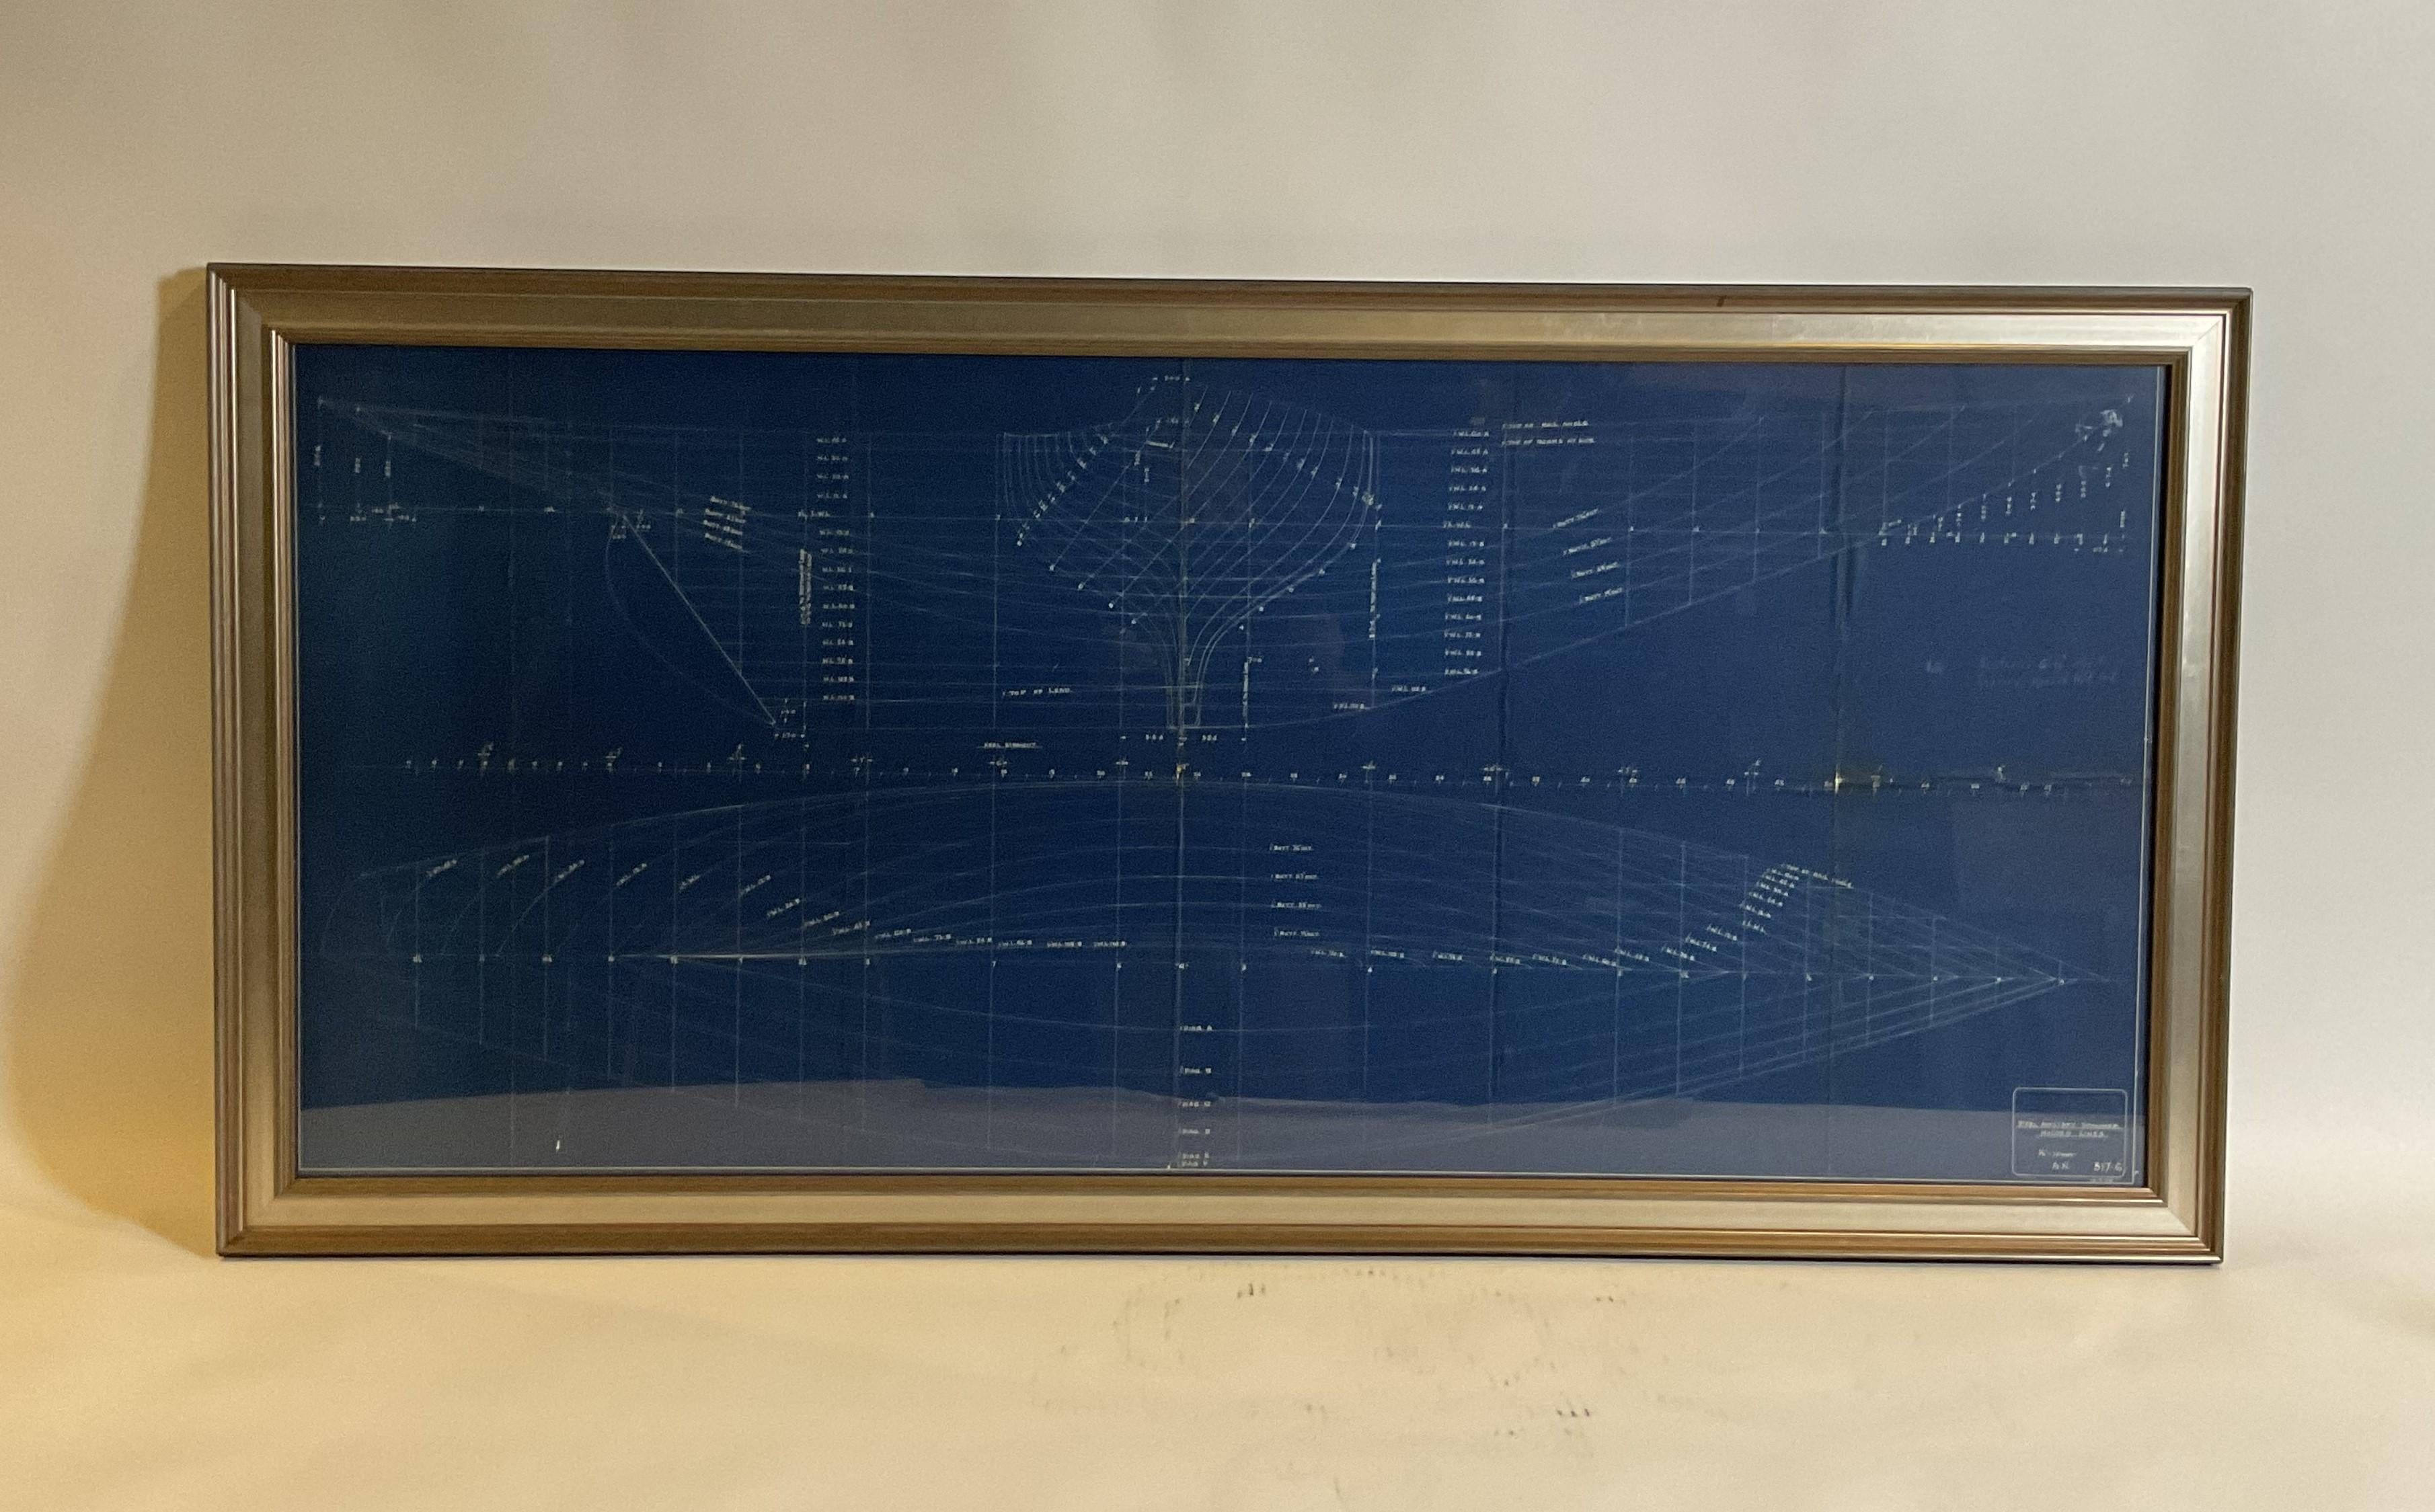 Ninety six foot Schooner blueprint from John Alden Naval Architects. Dated 10.9,.26. Fantastic hull lines blueprint showing the design from four angles. Large and vibrant. Many measurements. Historic yachting relic. 

Weight: 16 lbs.
Overall